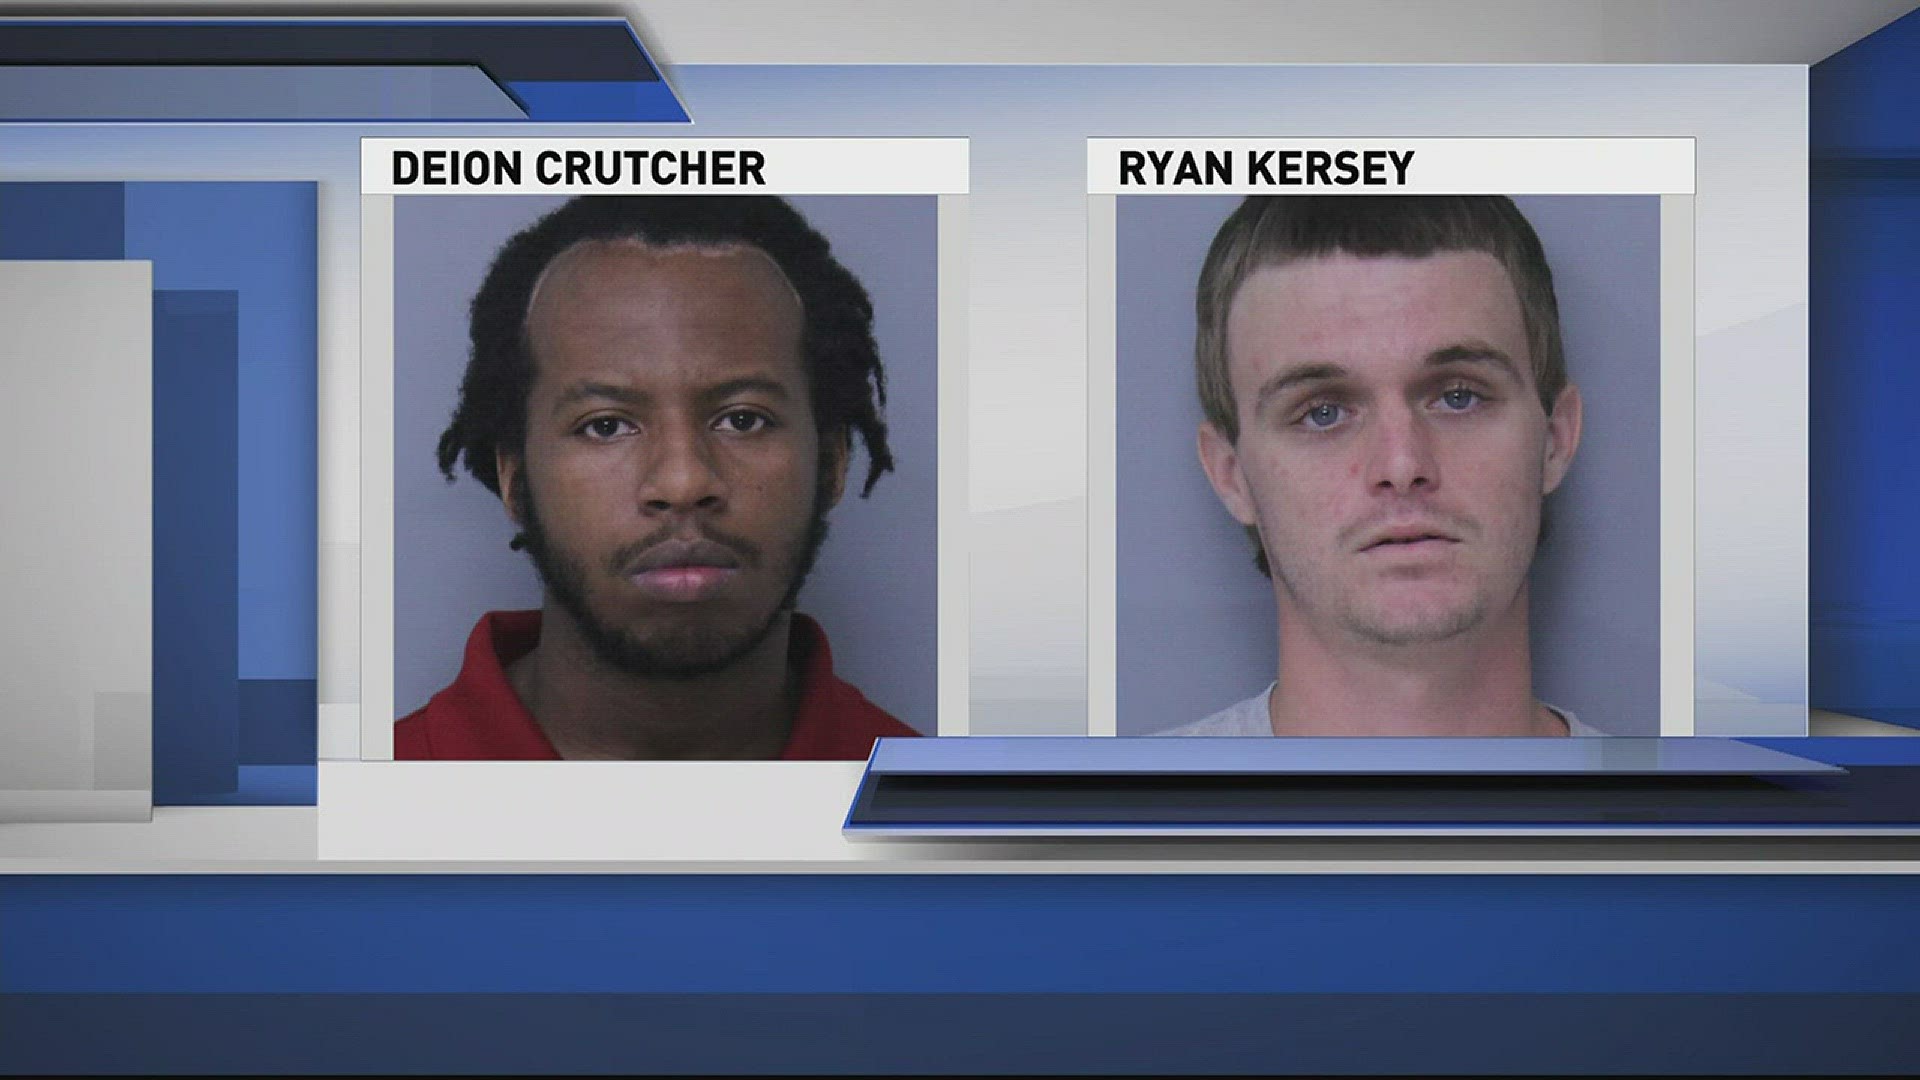 The St. Johns County Sheriff's Office announced this week that two more men have been arrested in connection to their undercover child sex sting called "Operation Cruel Summer."